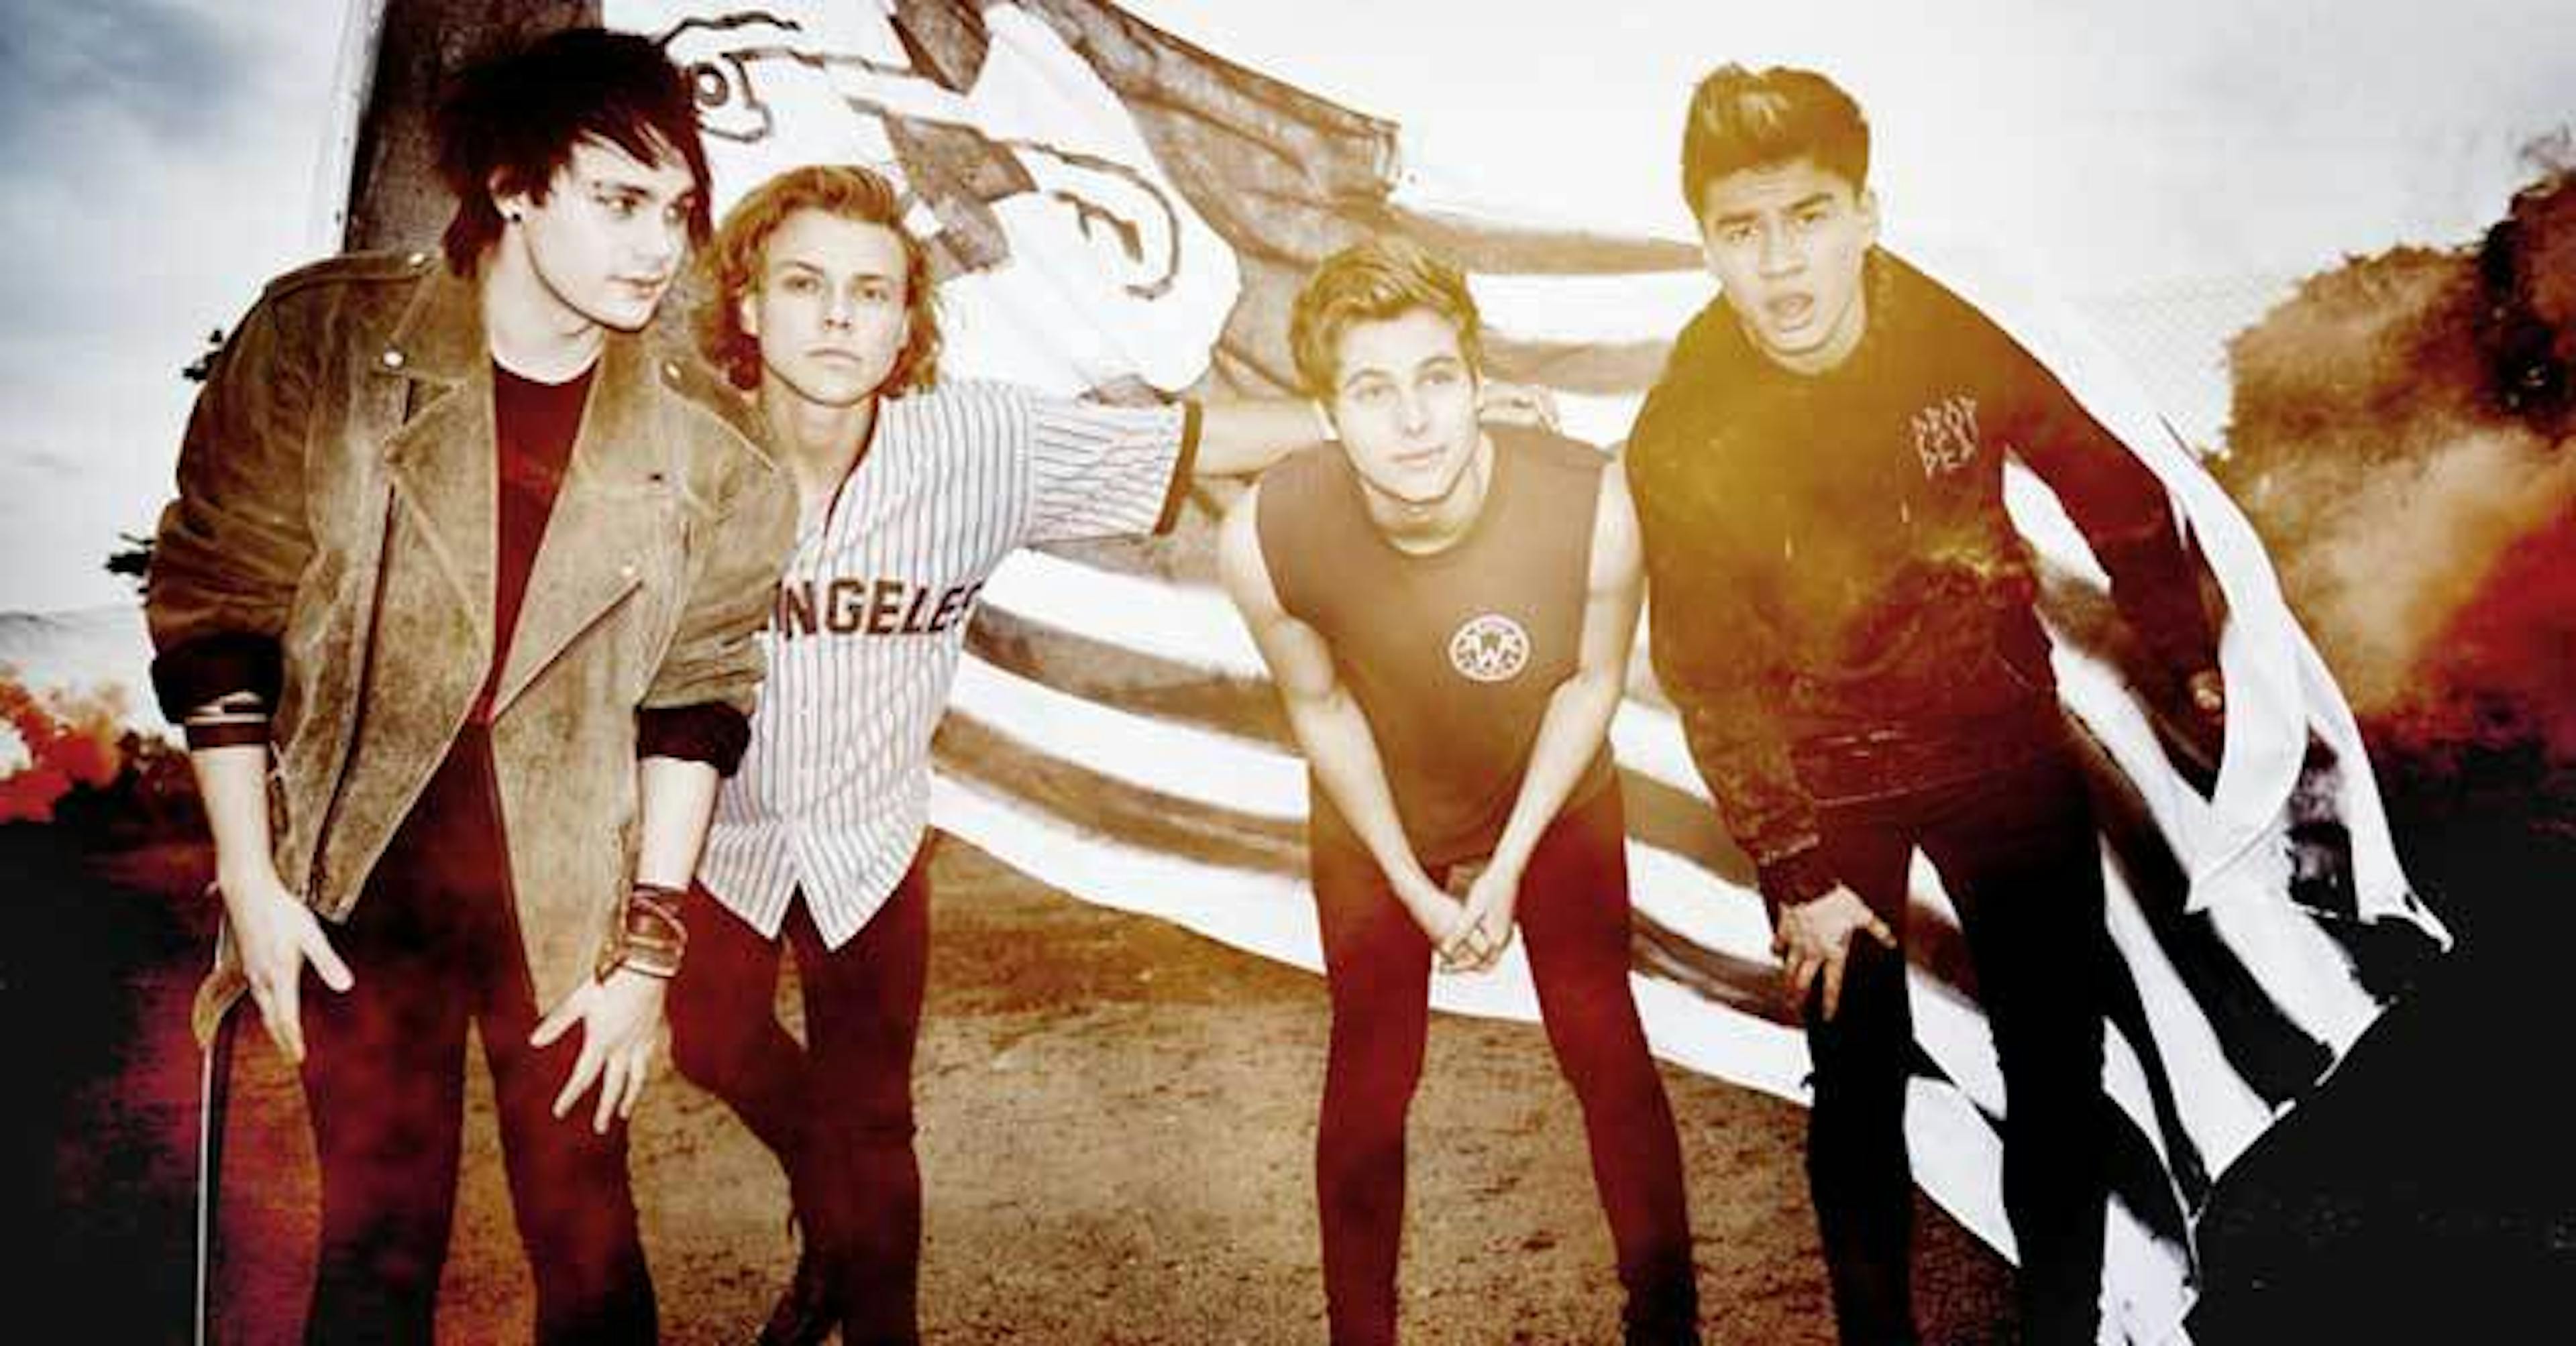 5 Seconds Of Summer On Course For Number One Album